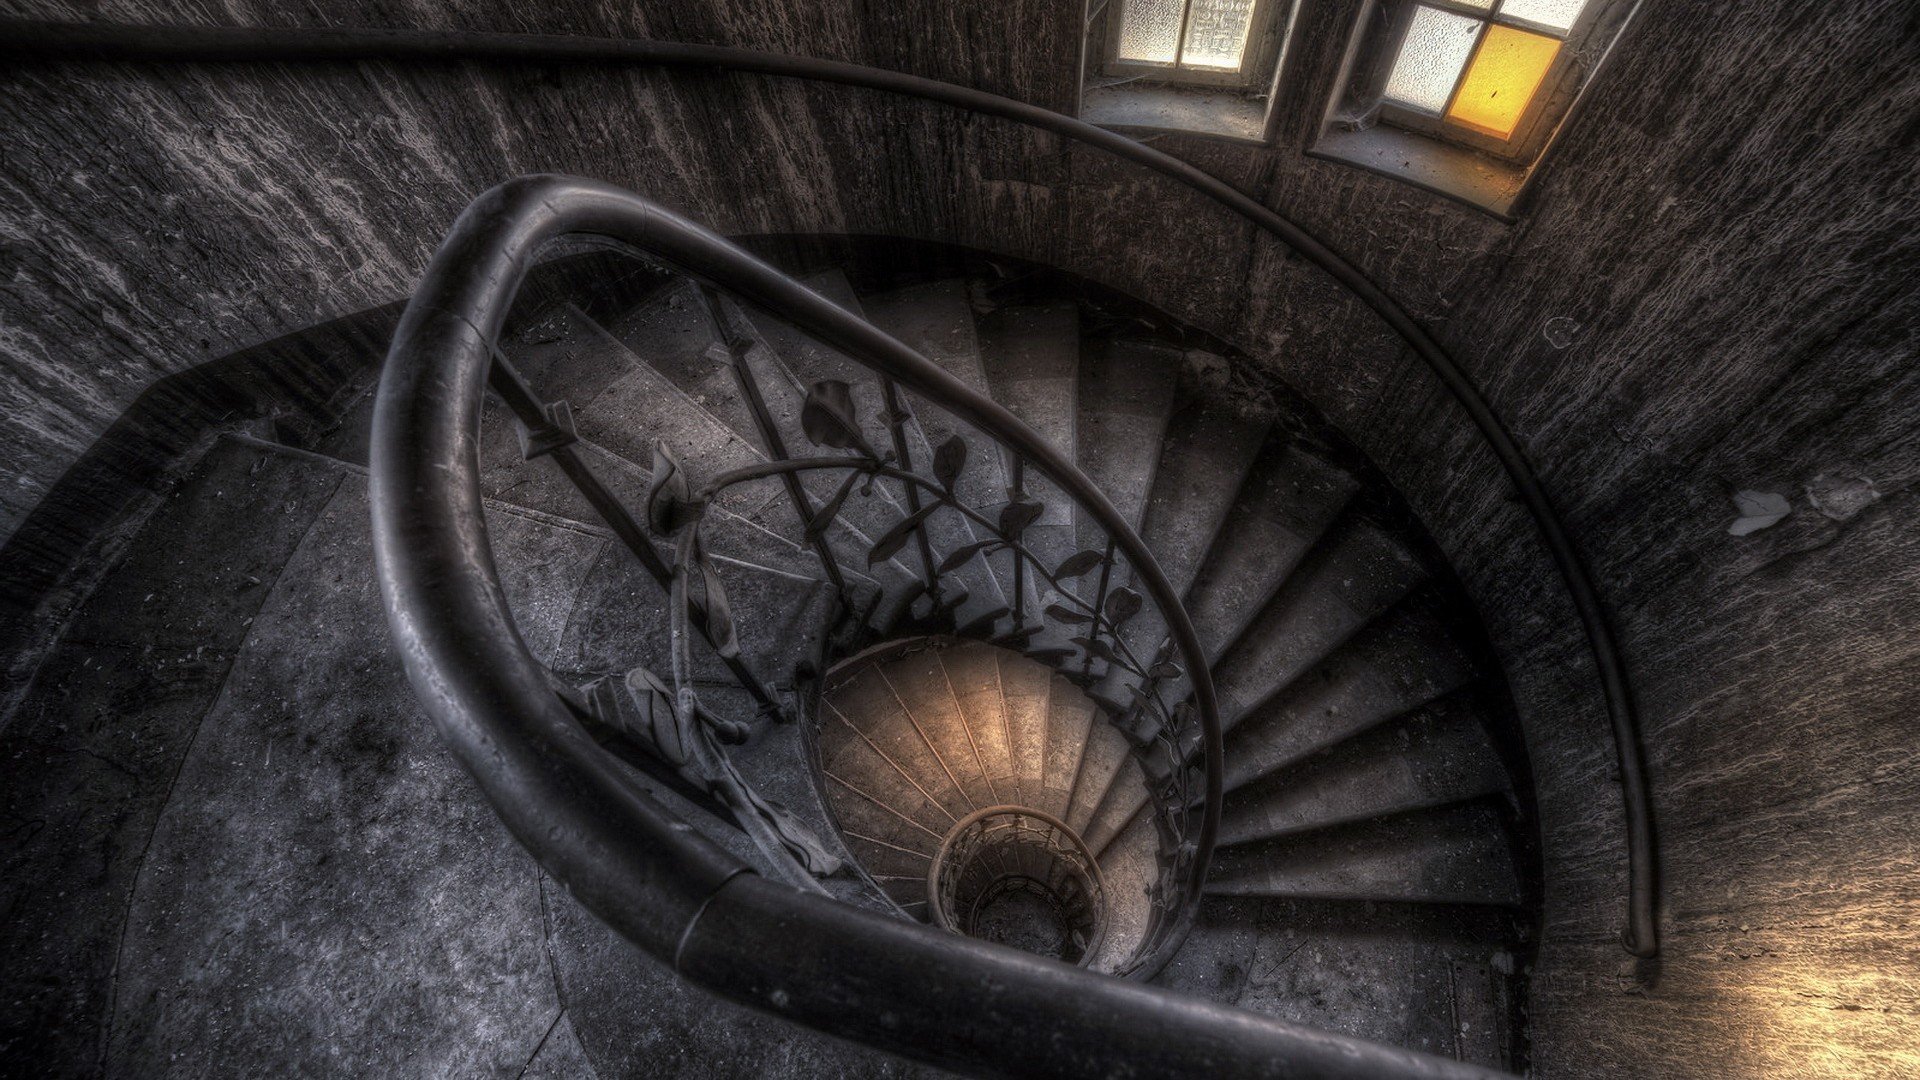 stairs, Building, Architecture, Interior, Window, Abandoned, Staircase, HDR, House Wallpaper